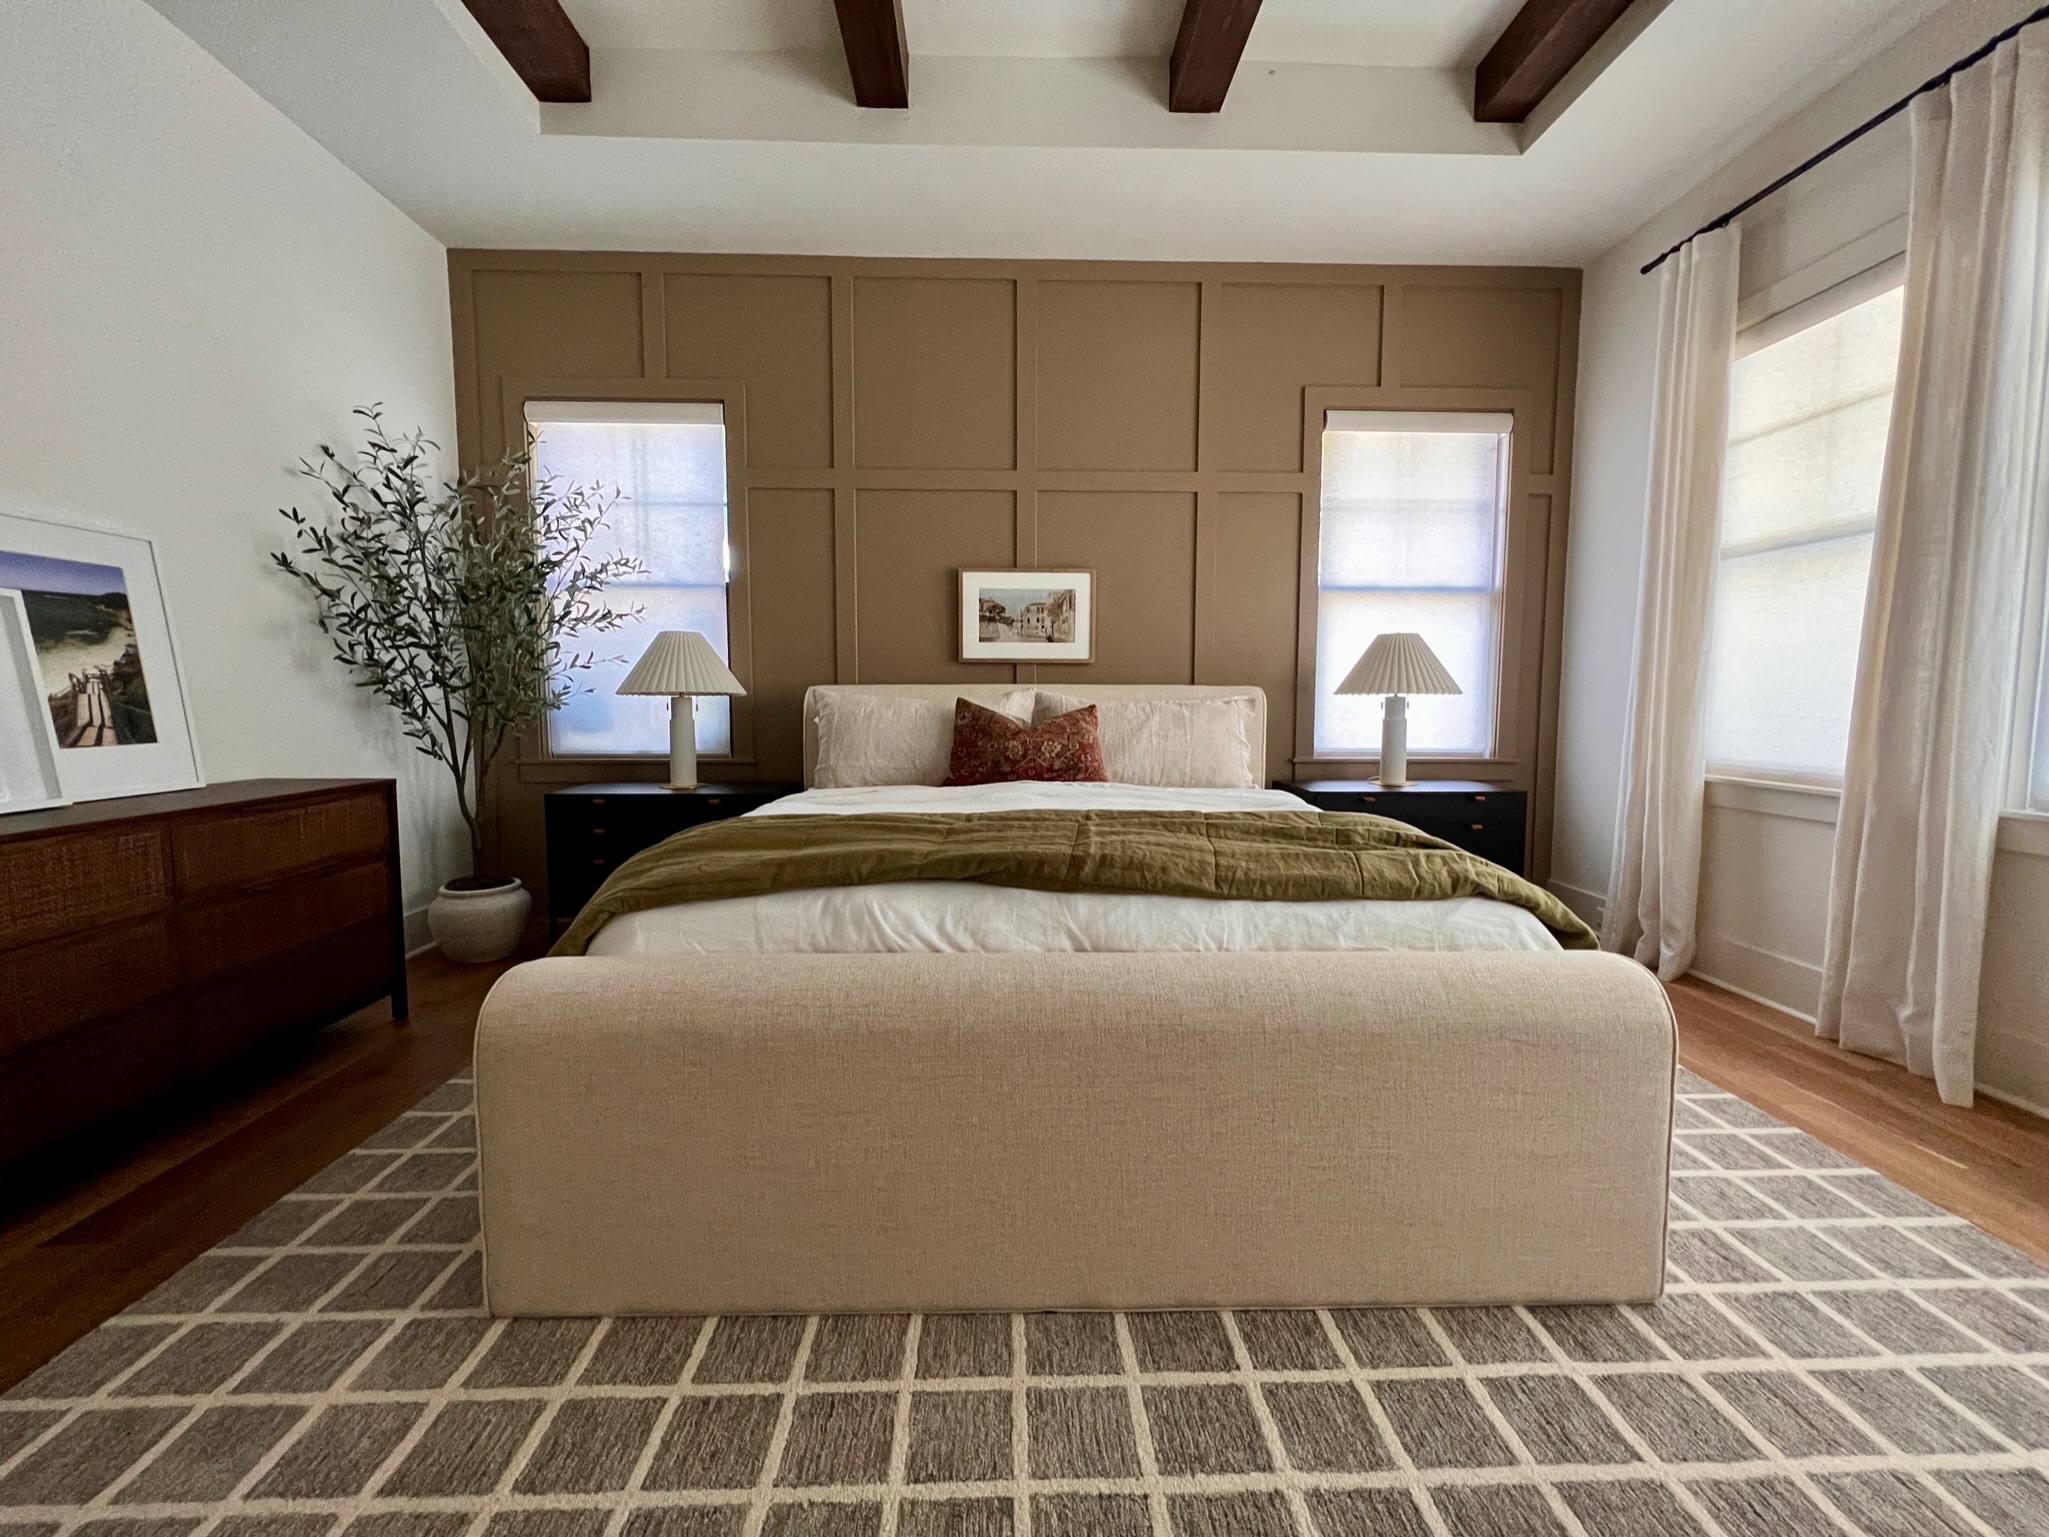 This timeless master bedroom accent wall gives the room a focal point.